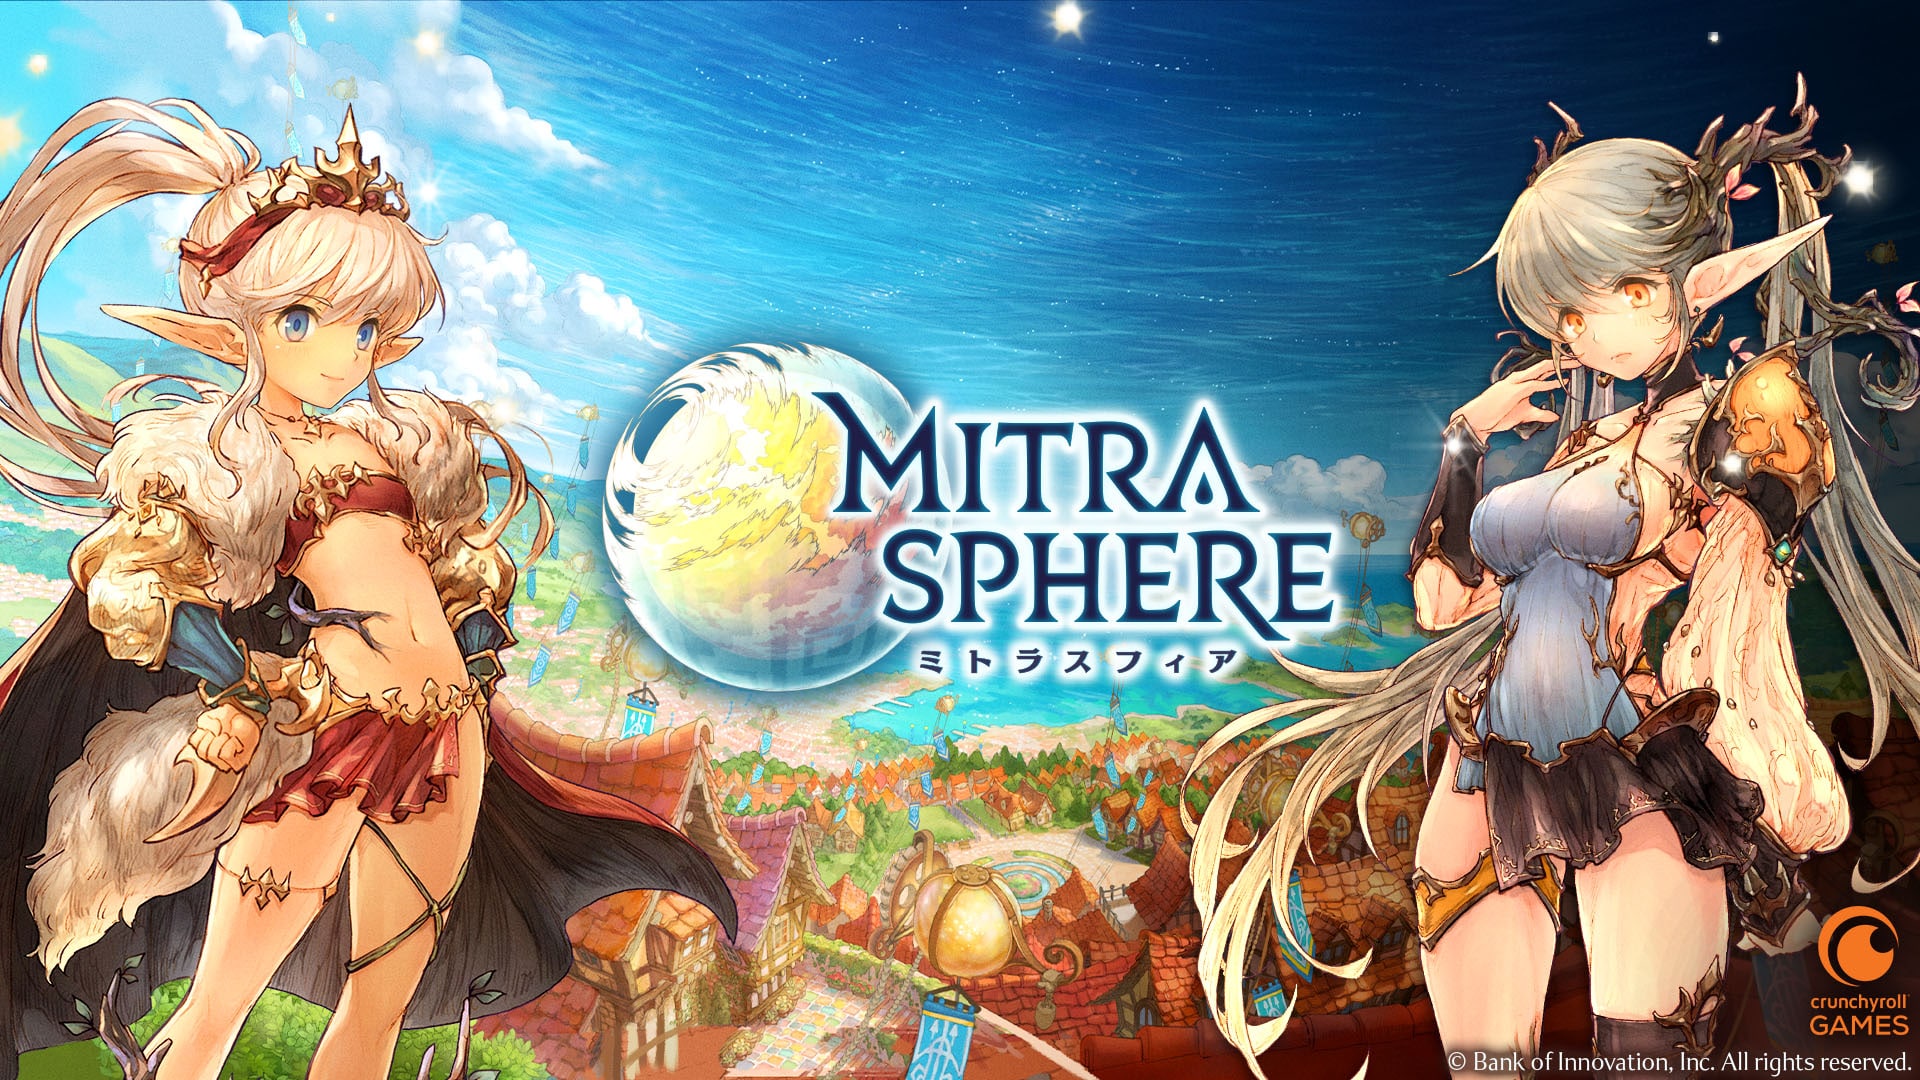 Fantasy RPG ‘Mitrasphere’ Available Now in the West